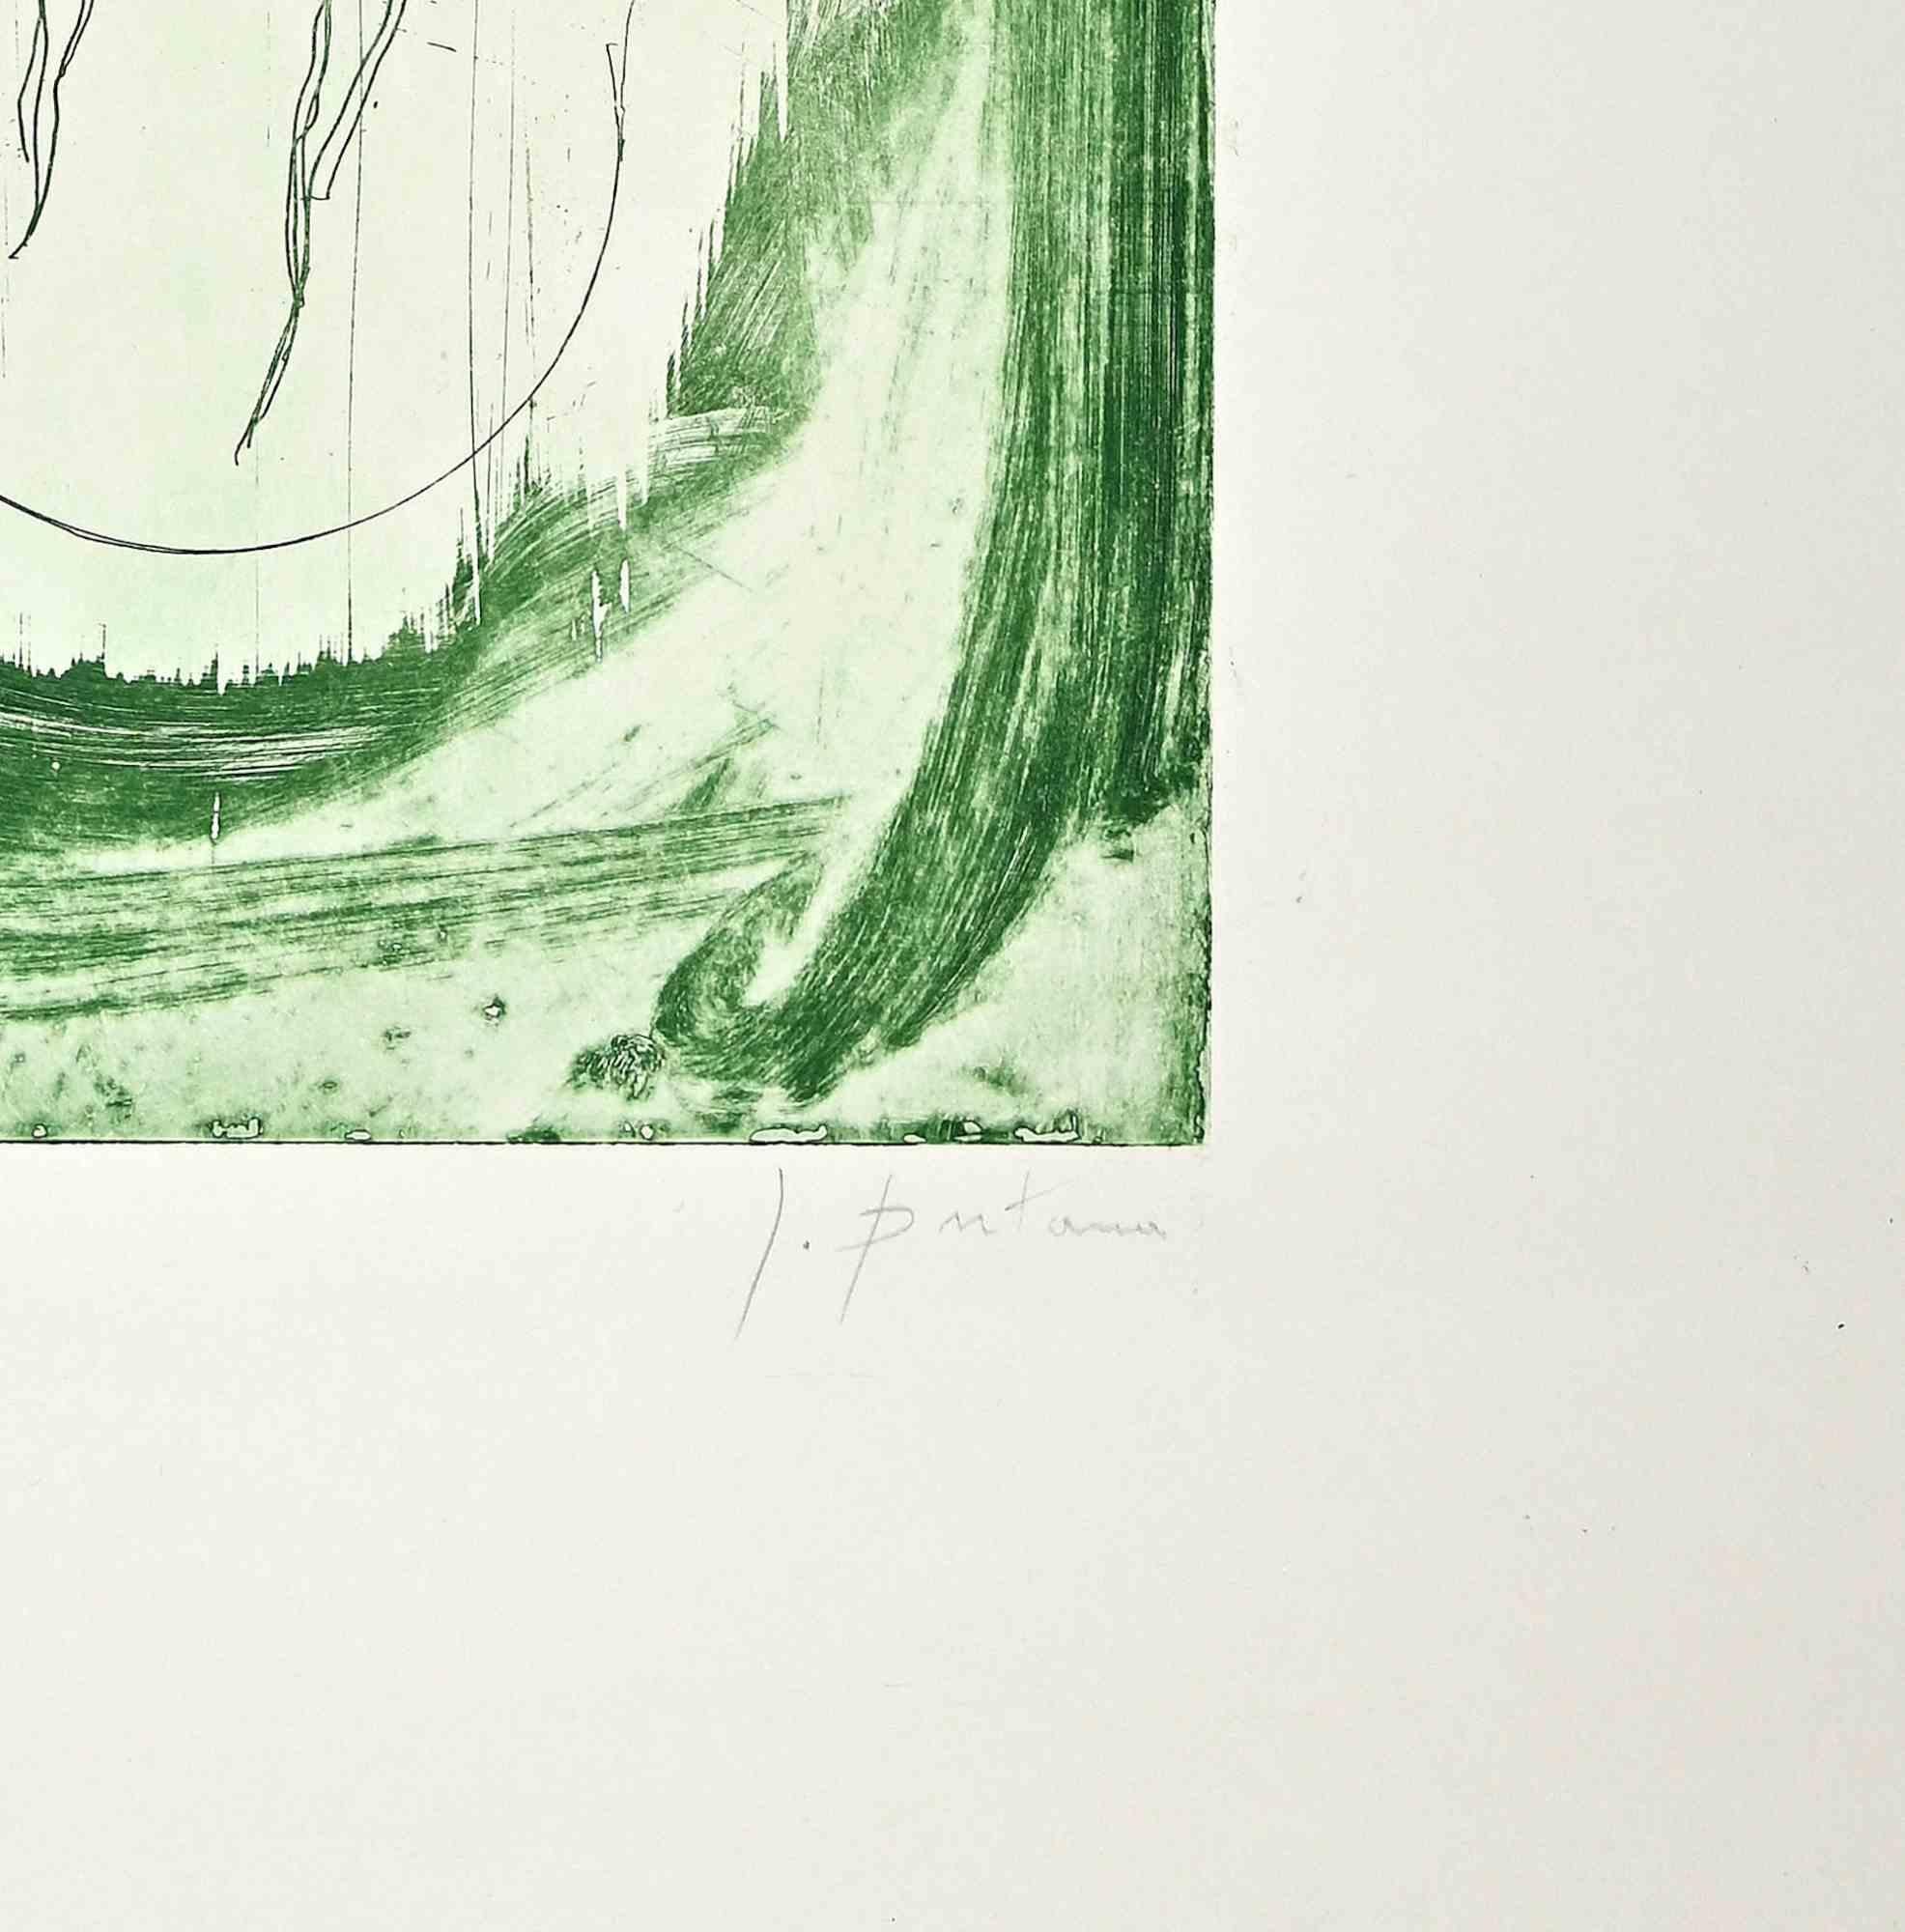 Untitled is an original contemporary artwork realized by Lucio Fontana in the half of 20th Century.

Colored etching on paper.

Hand signed on the lower right margin.

Numbered on the lower left margin. Edition 10/60

Good conditions.

Lucio Fontana